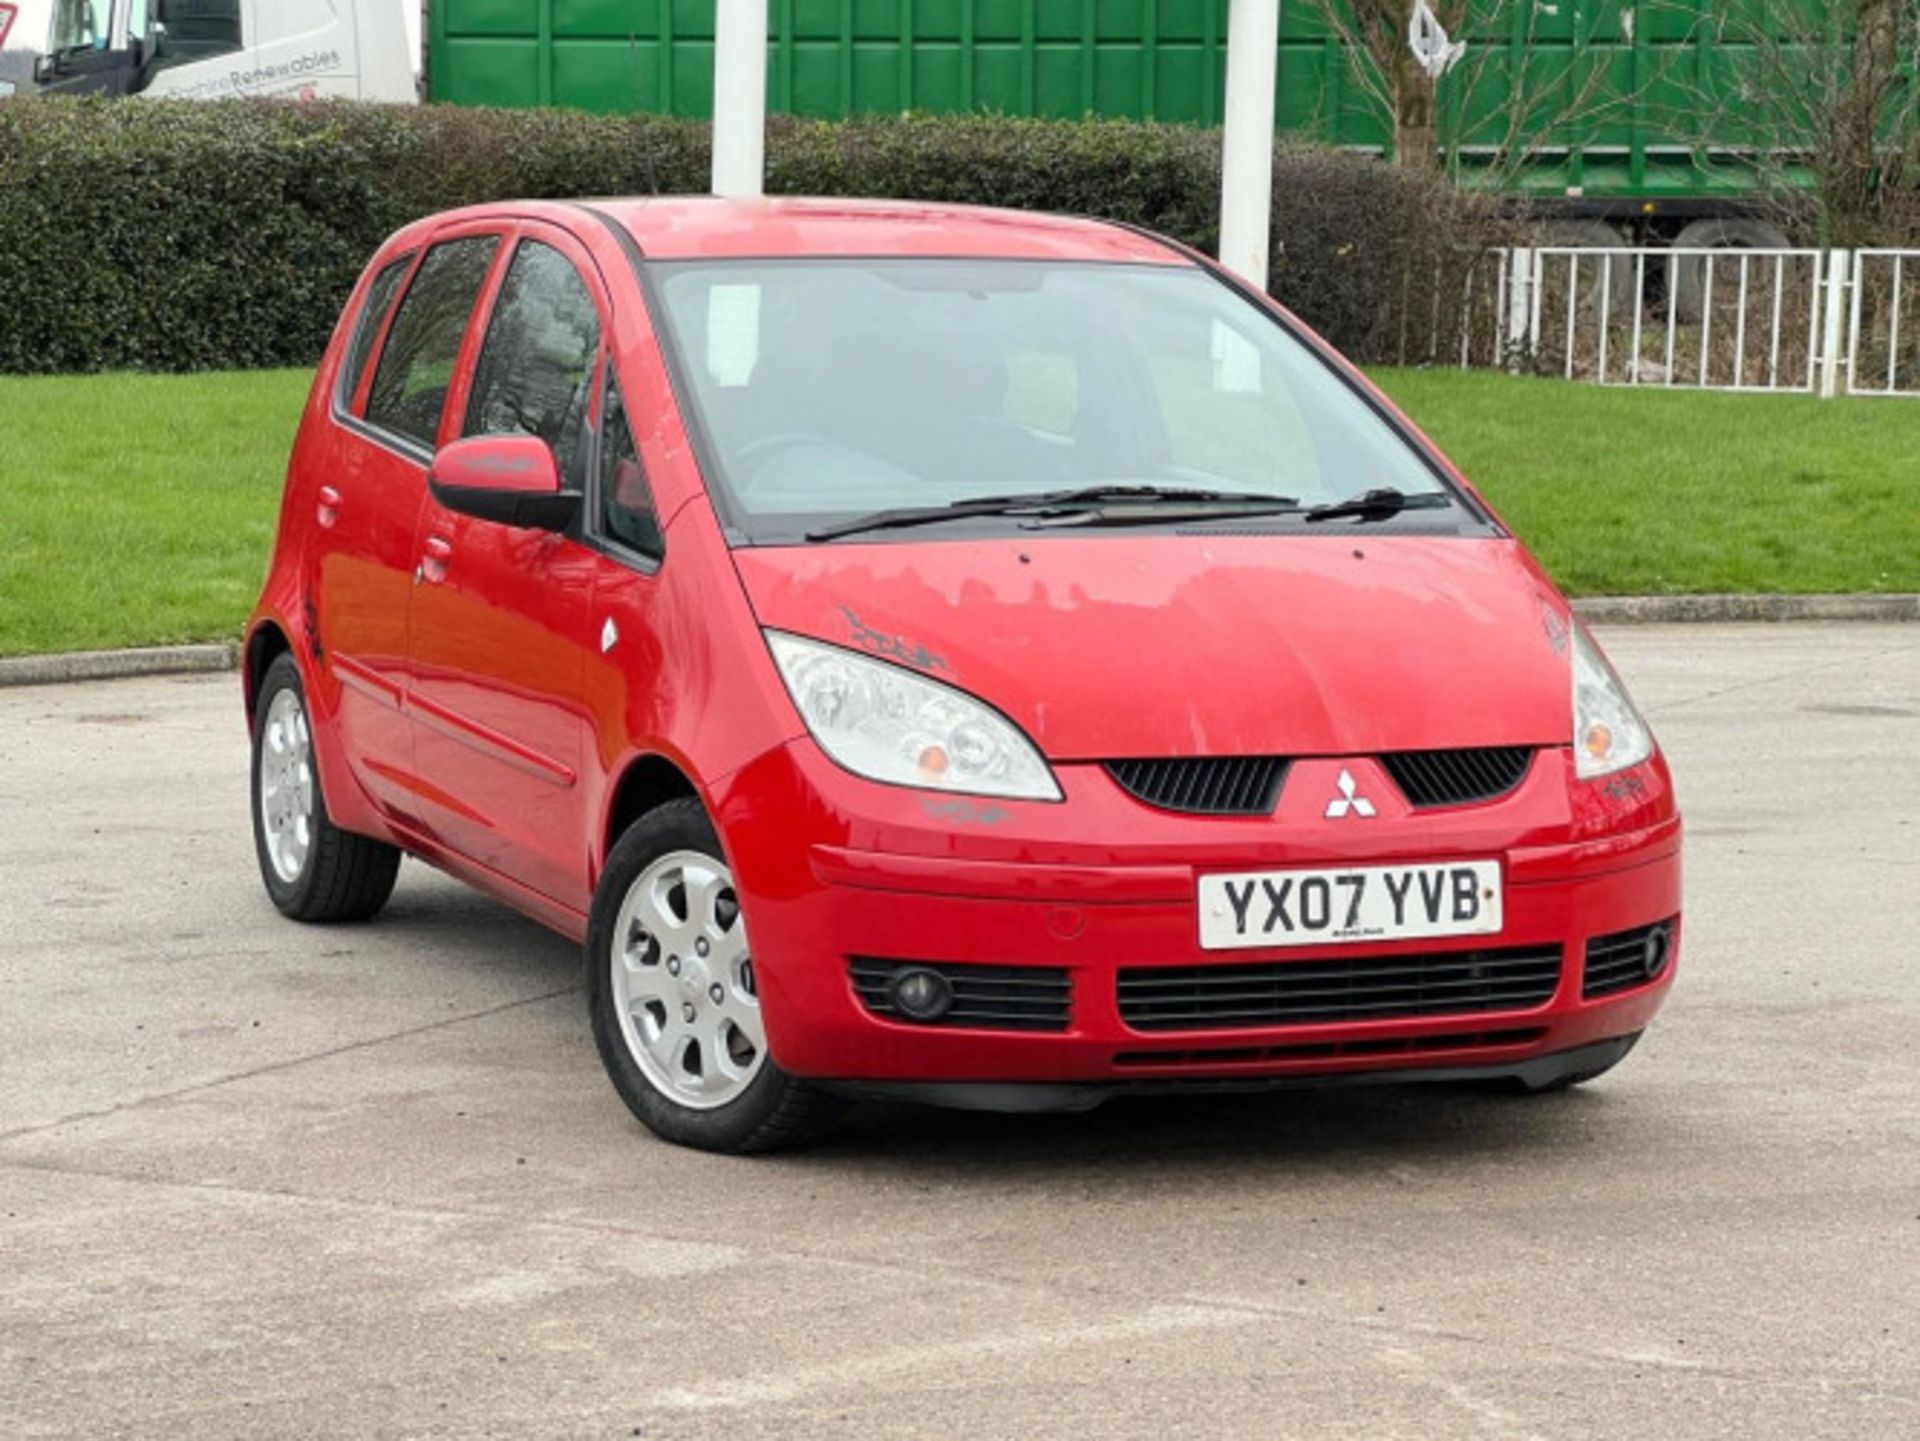 2007 MITSUBISHI COLT 1.5 DI-D DIESEL AUTOMATIC >>--NO VAT ON HAMMER--<< - Image 118 of 127